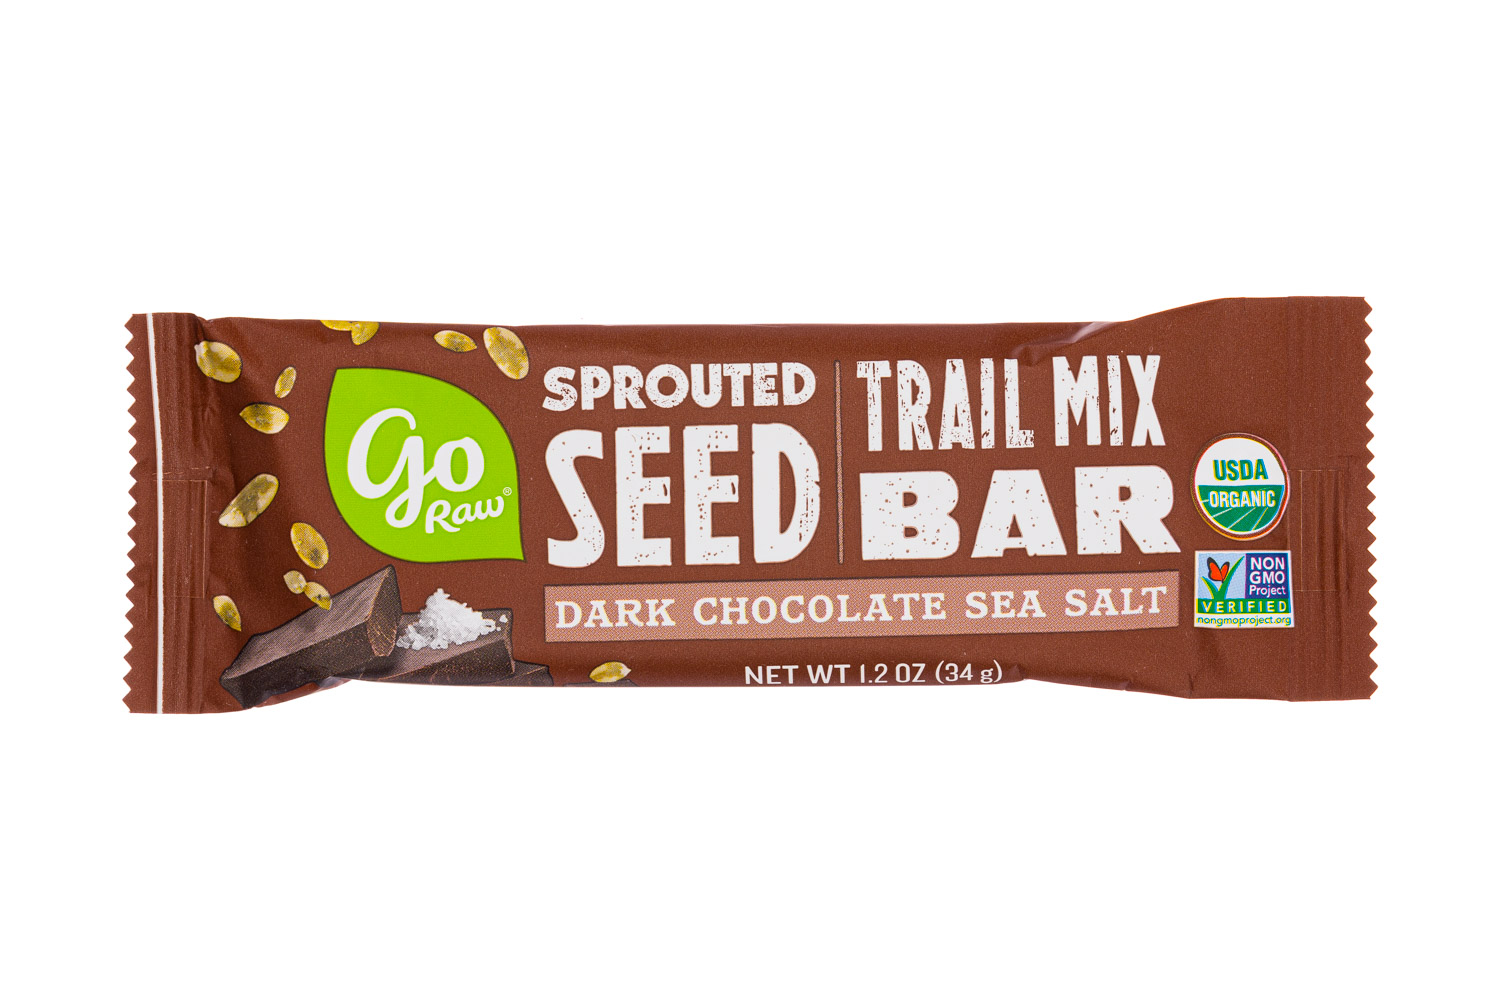 Sprouted Seed Trail Mix Bar - Dark Chocolate Cherry